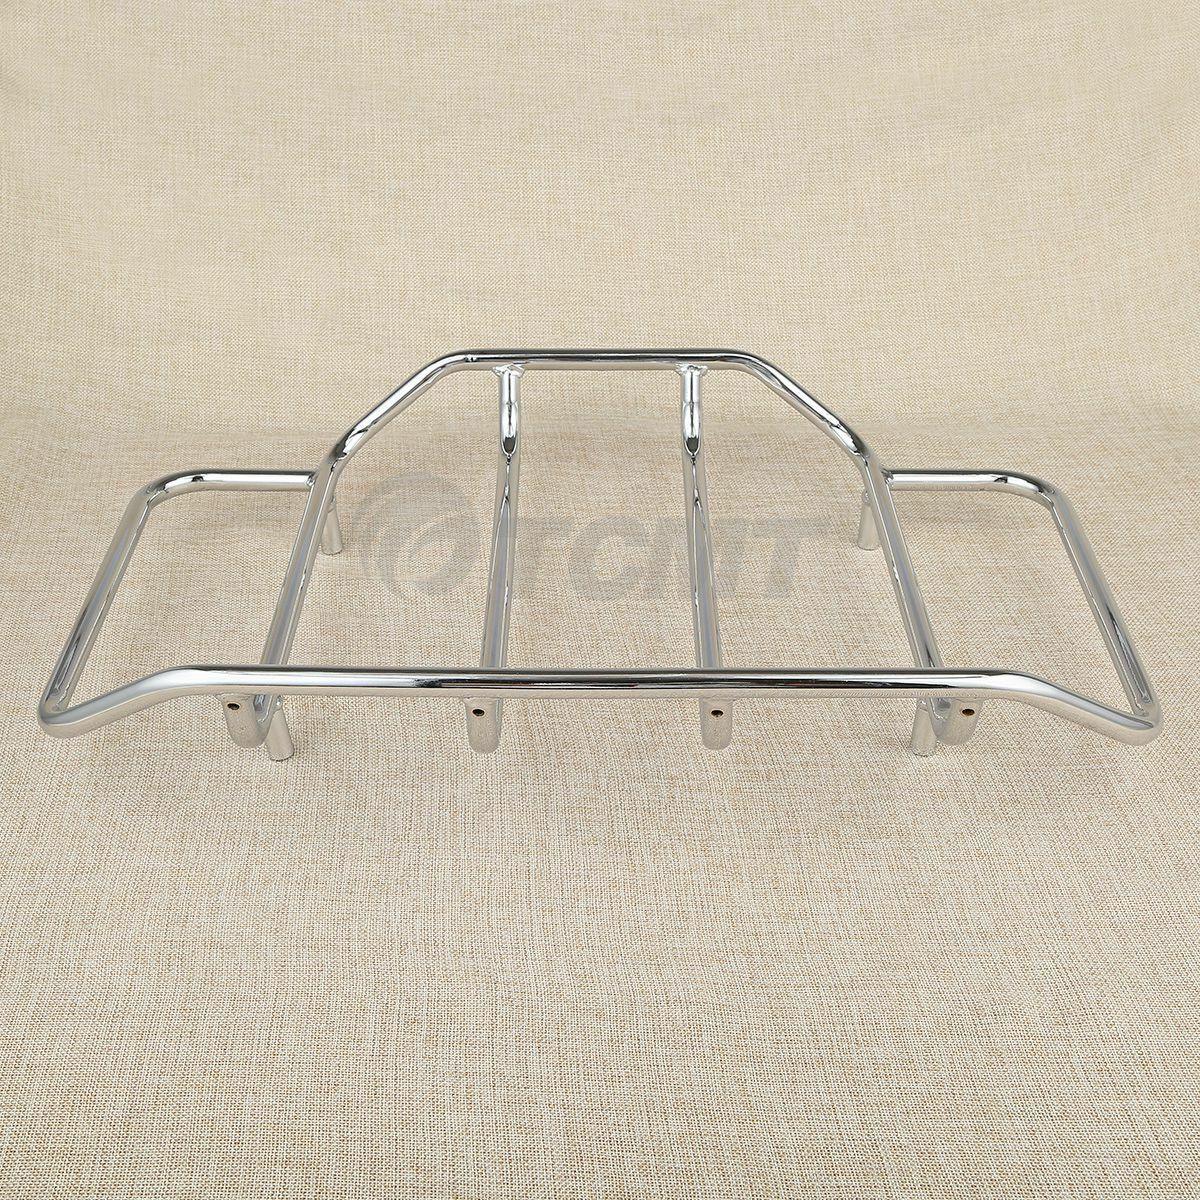 Chrome Luggage Top Rack Fit For Harley Touring Tour Pak Road King Street Glide - Moto Life Products